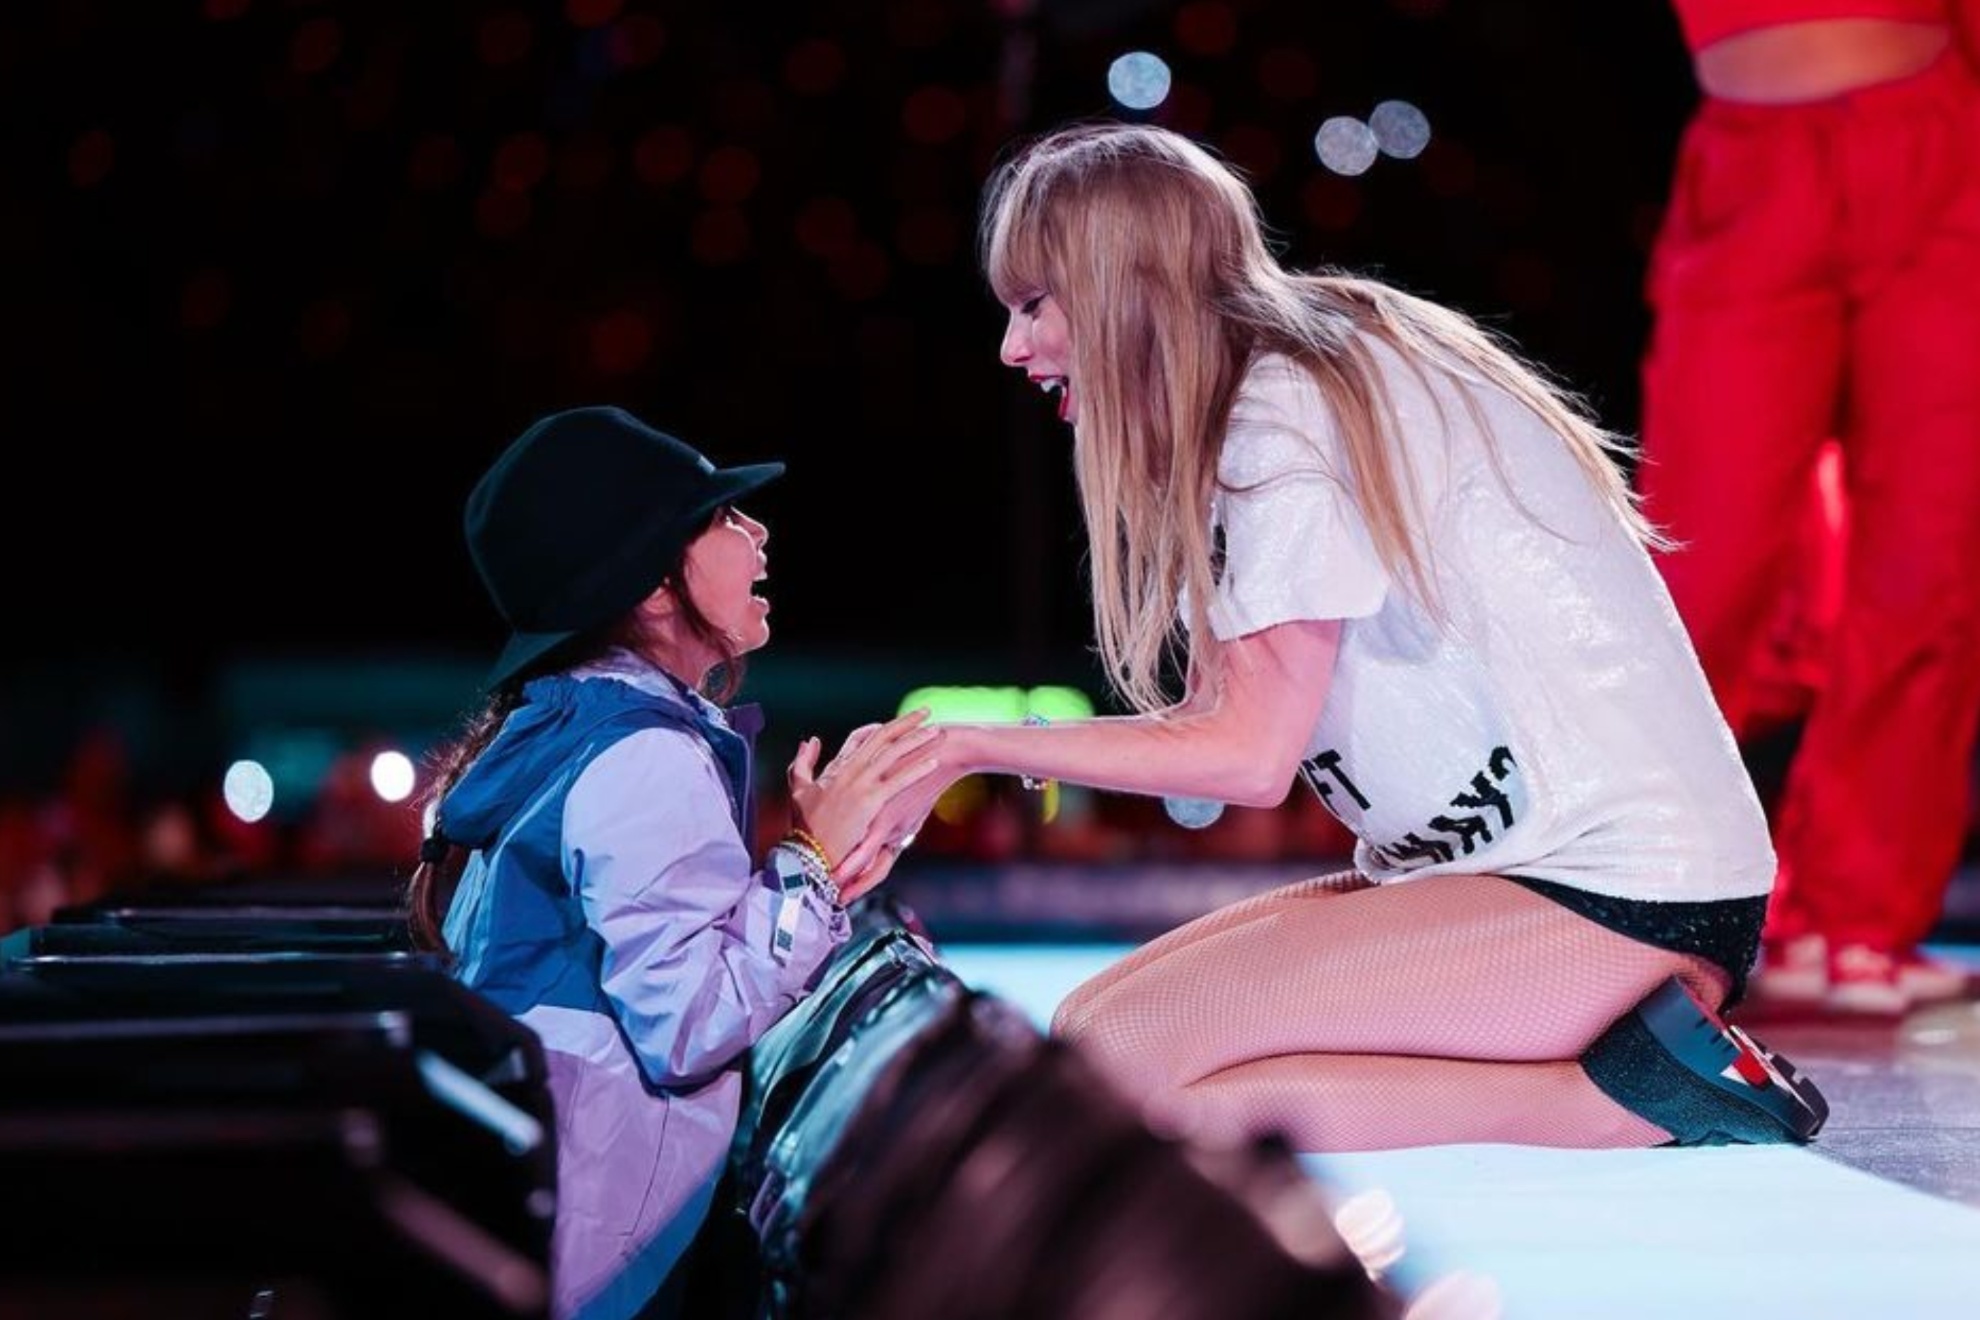 Taylow Swift gives away her hat during the performance of the song "22" in the Eras Tour